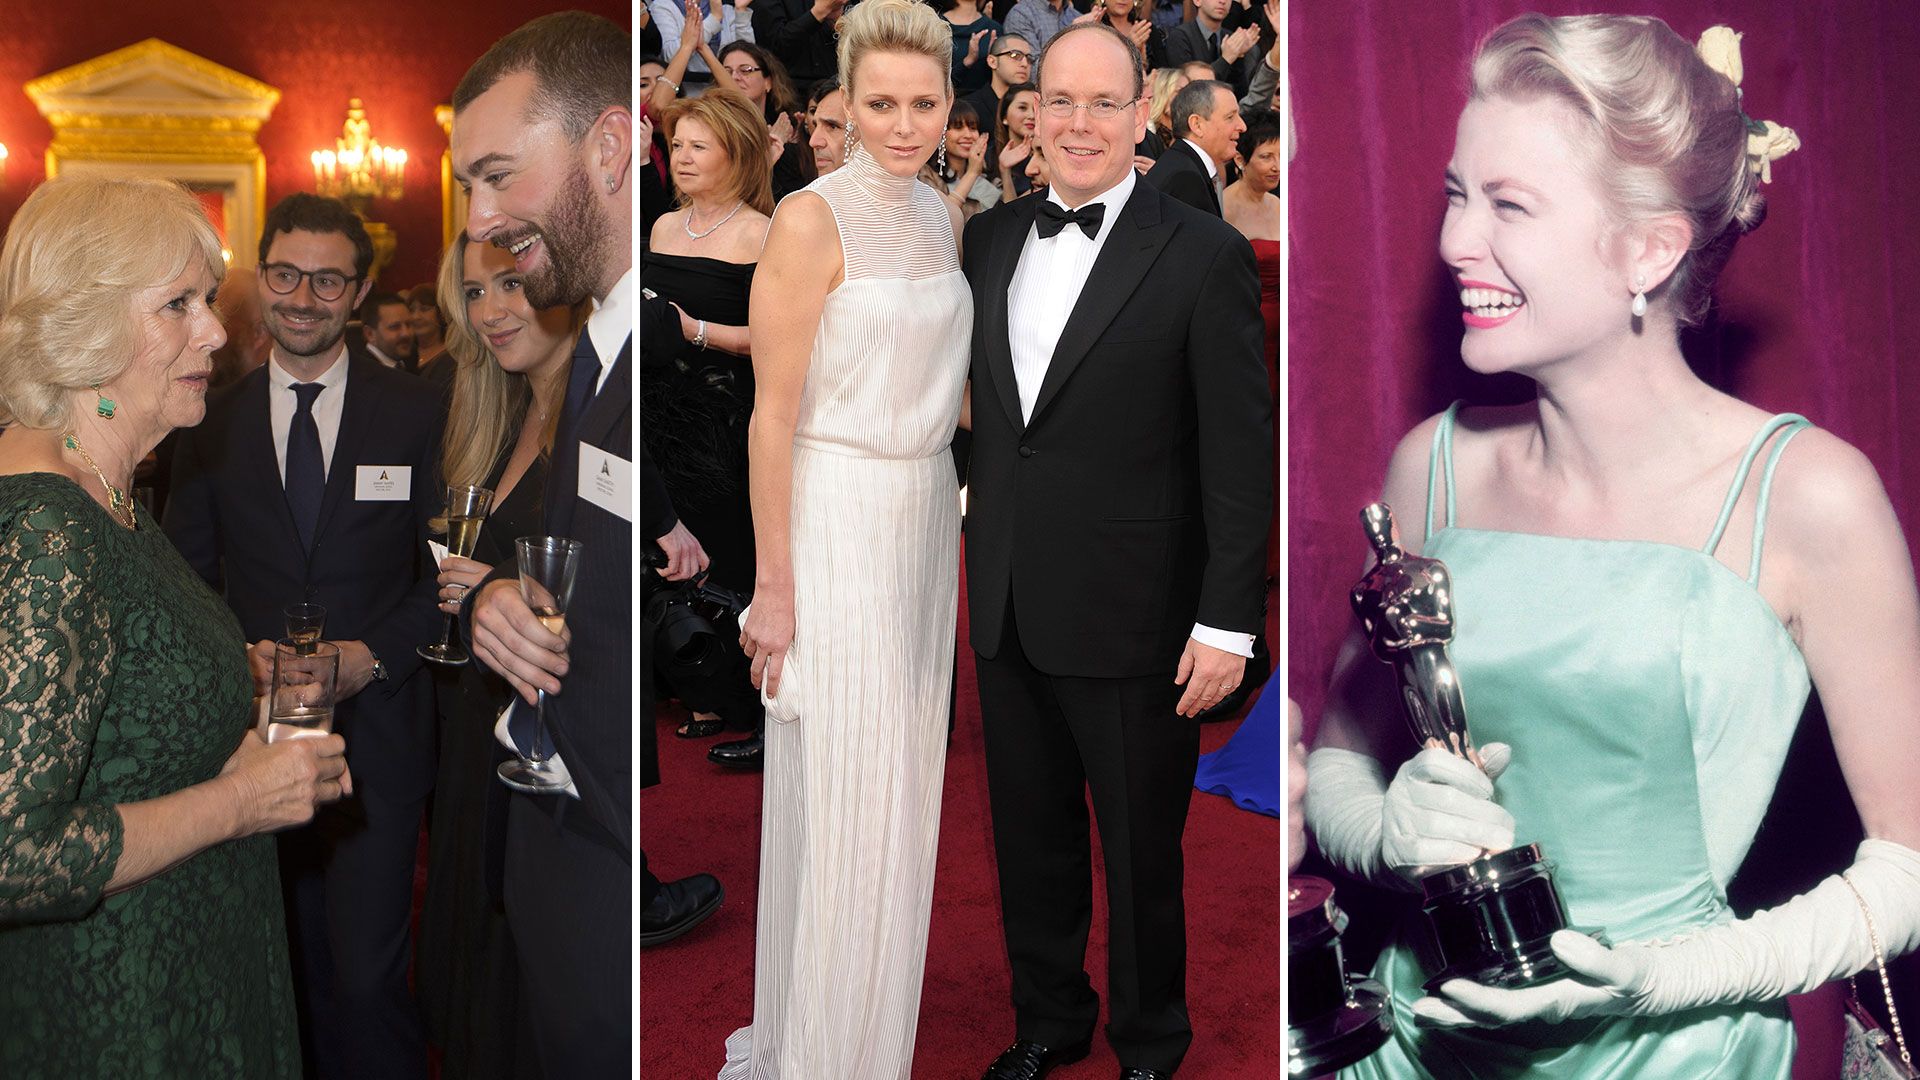 Glitzy royals at the Oscars: from Queen Camilla's green lace to Princess Charlene's angelic white